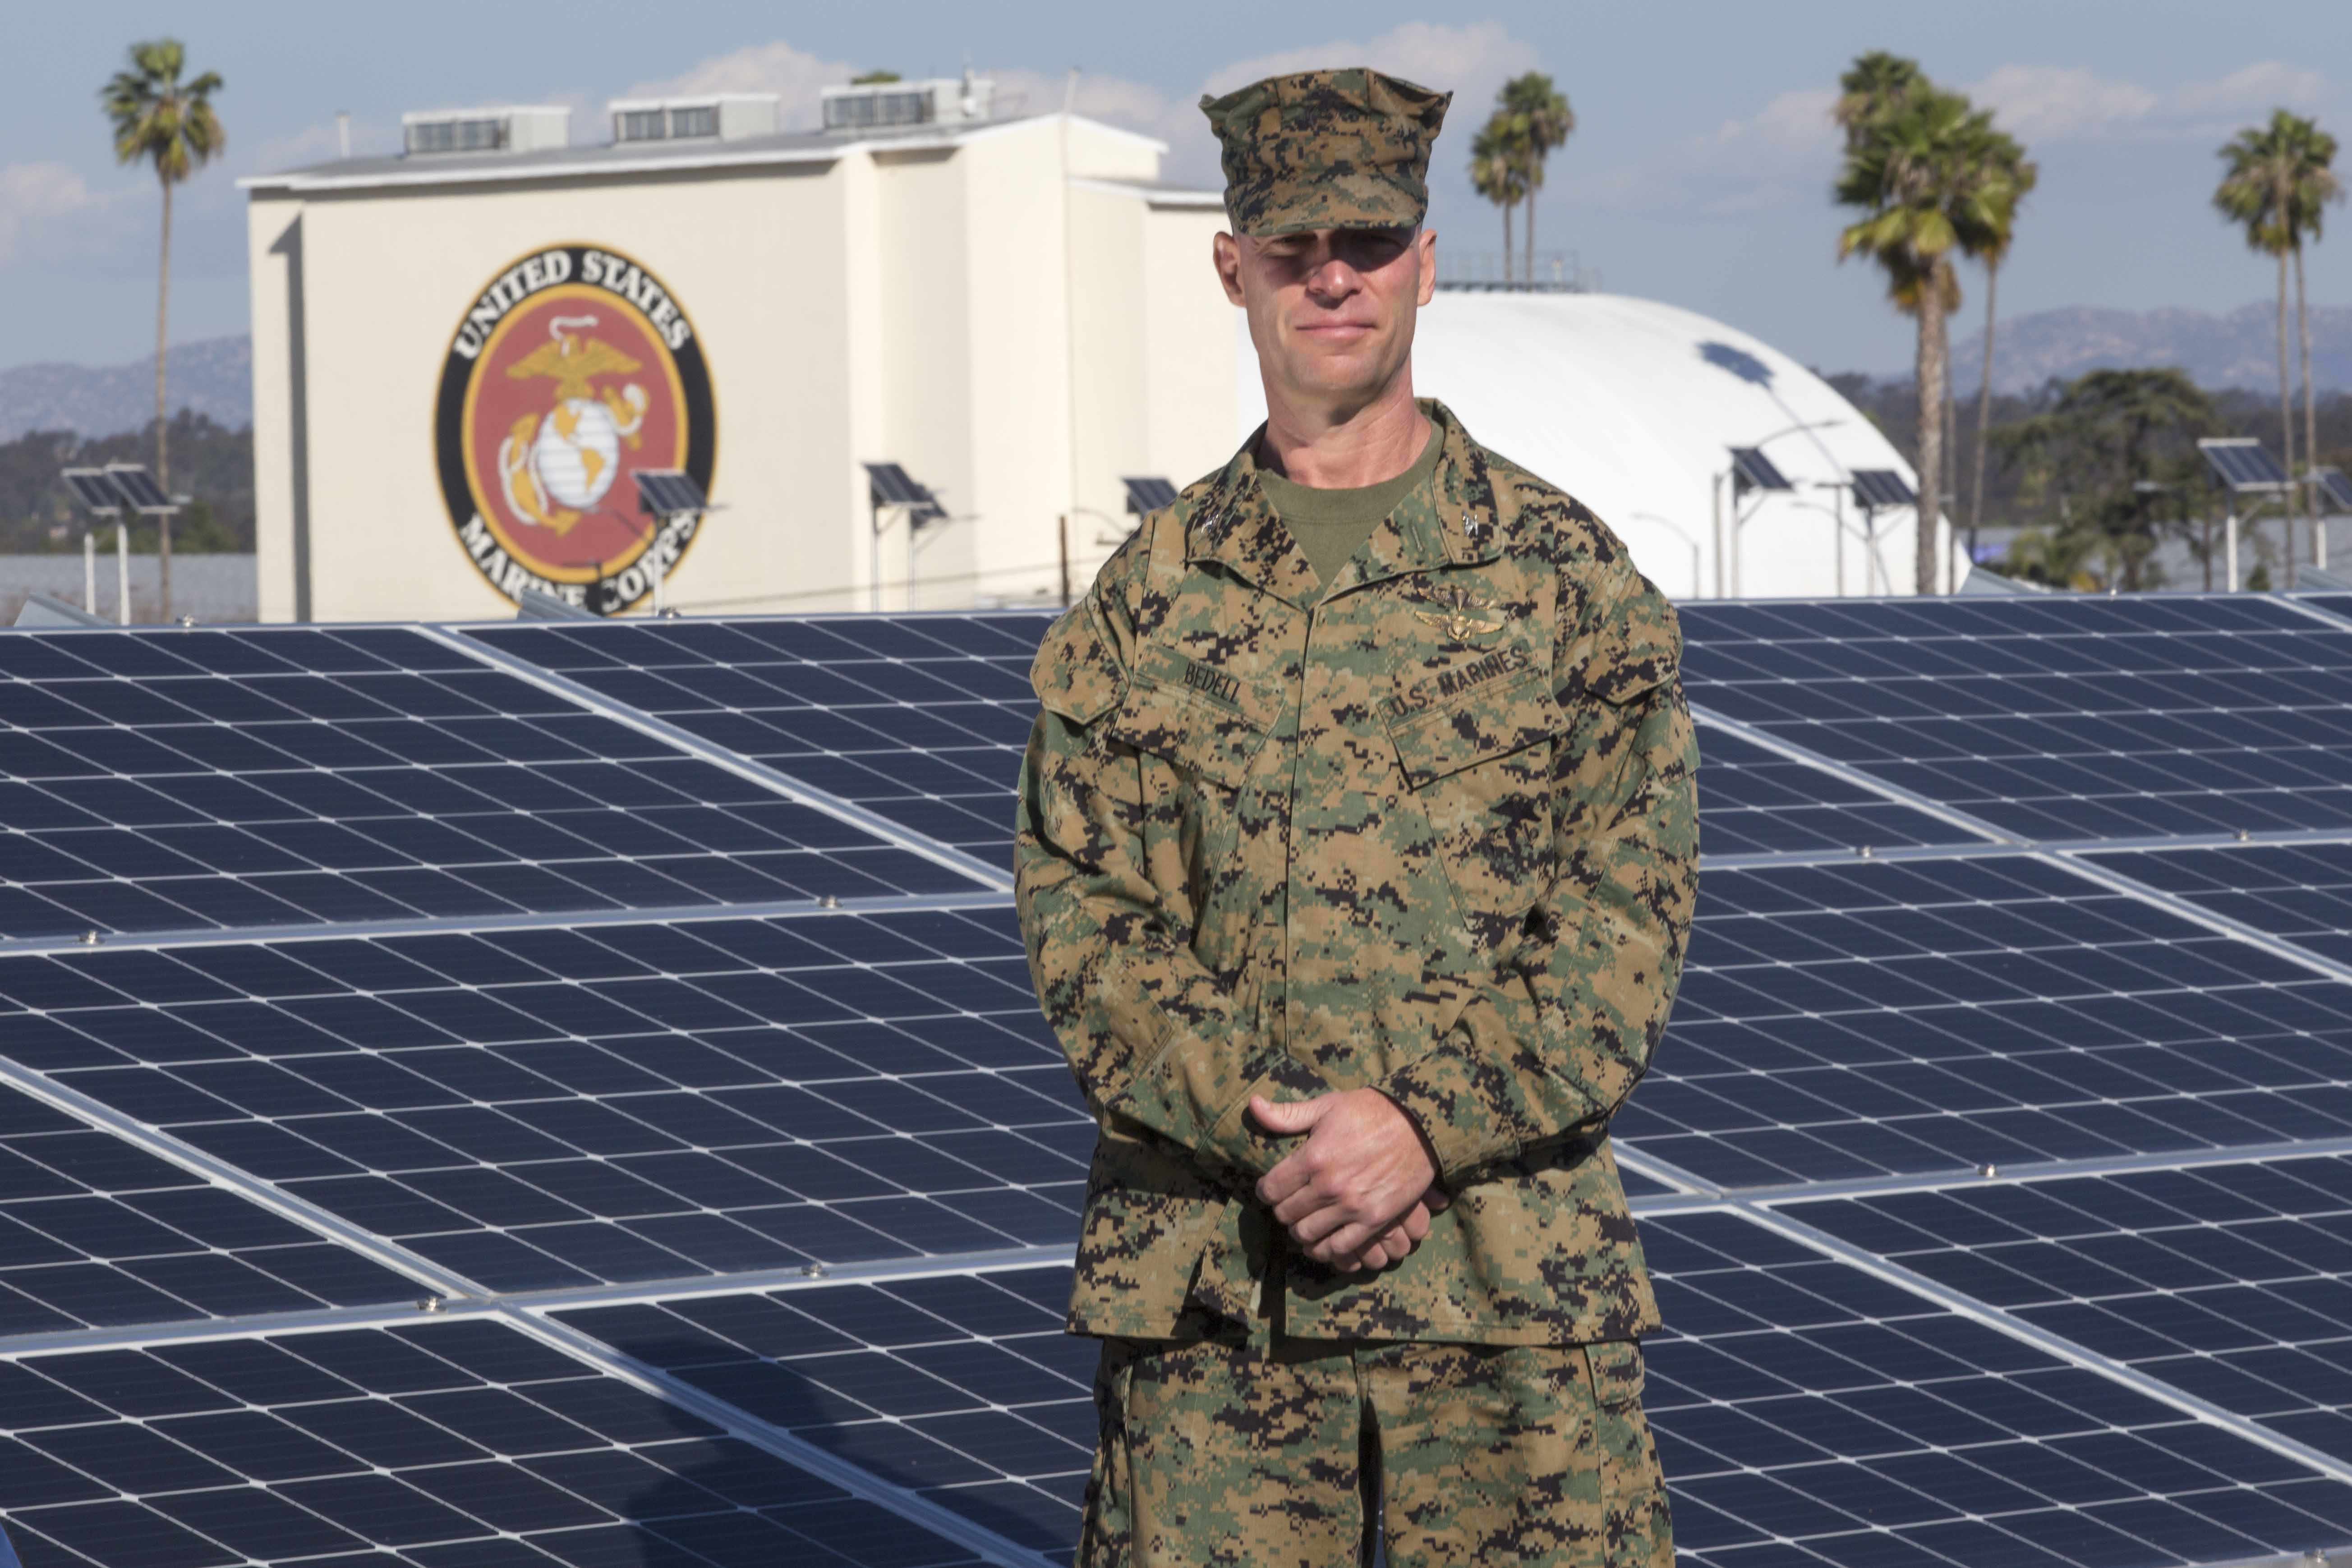 A Marine in uniform posing in front of a giant solar panel.